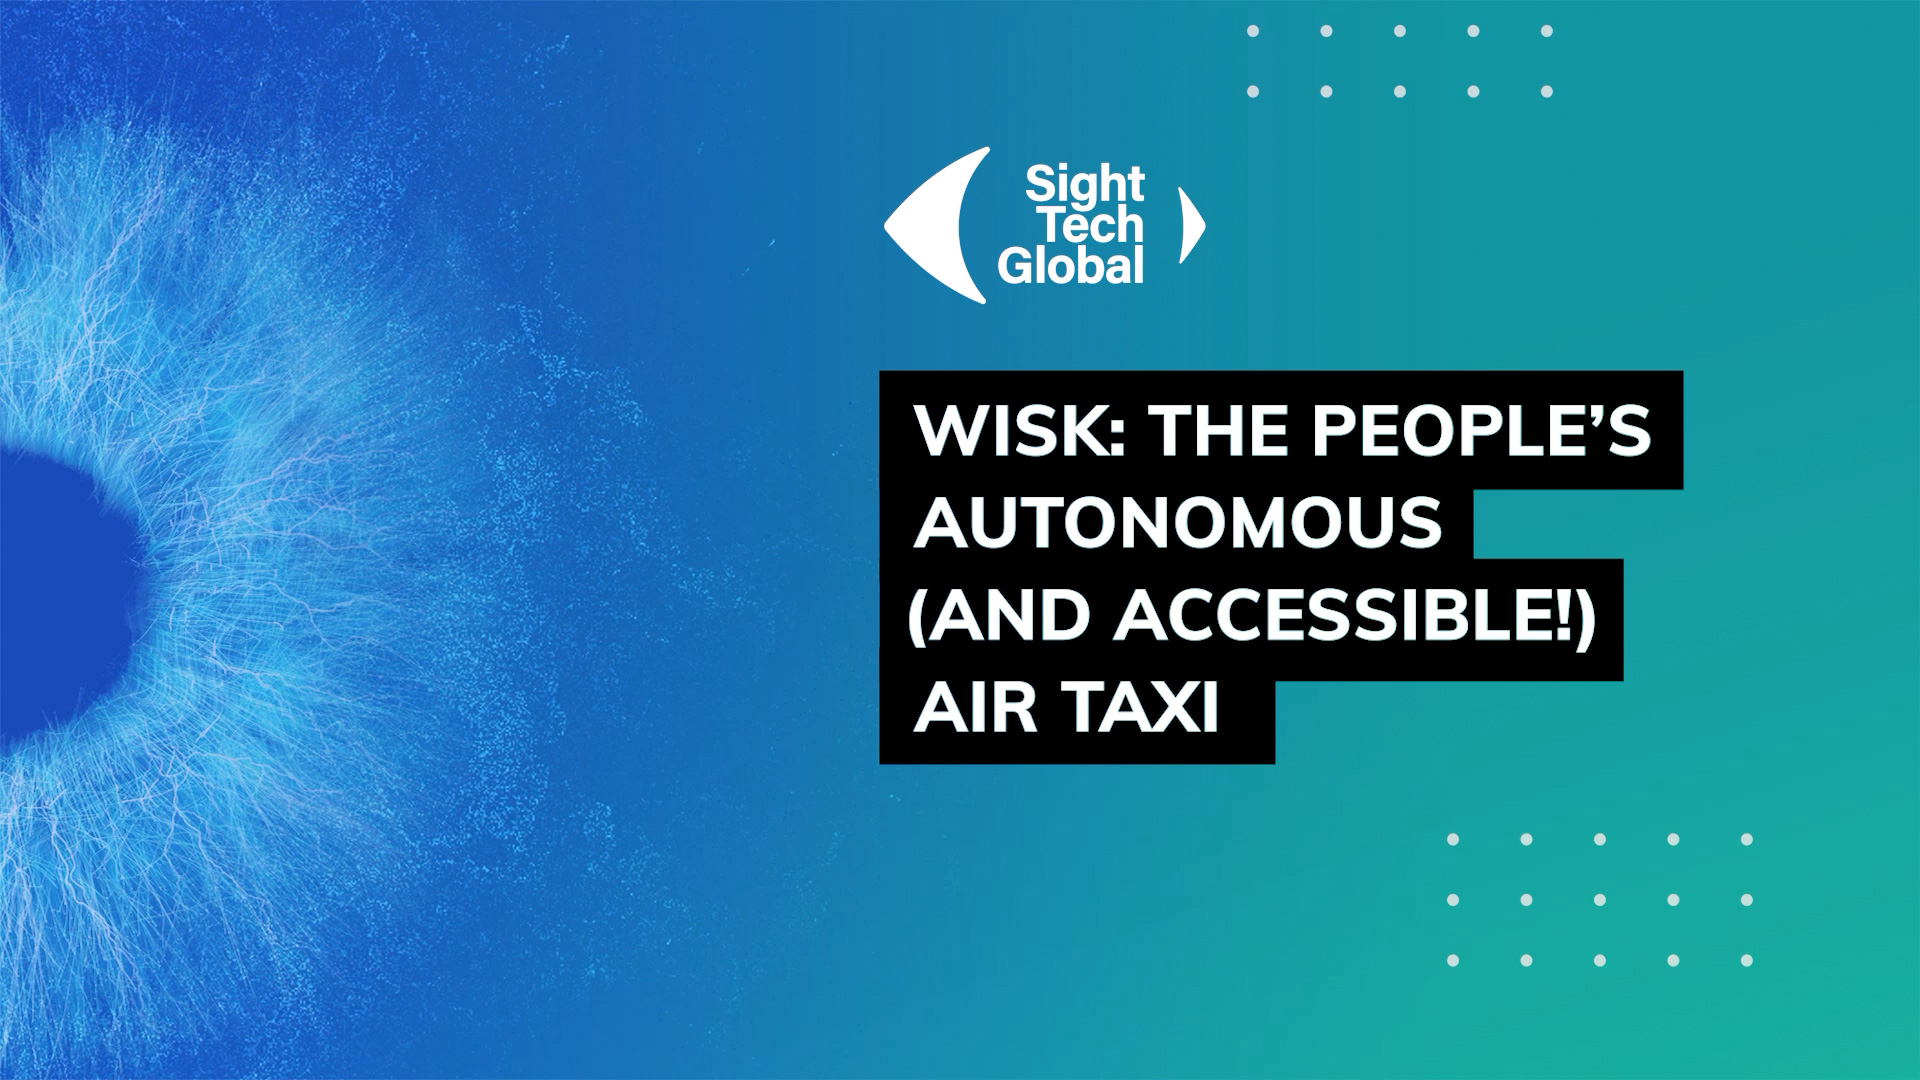 Wisk: The people’s autonomous (and accessible!) air taxi